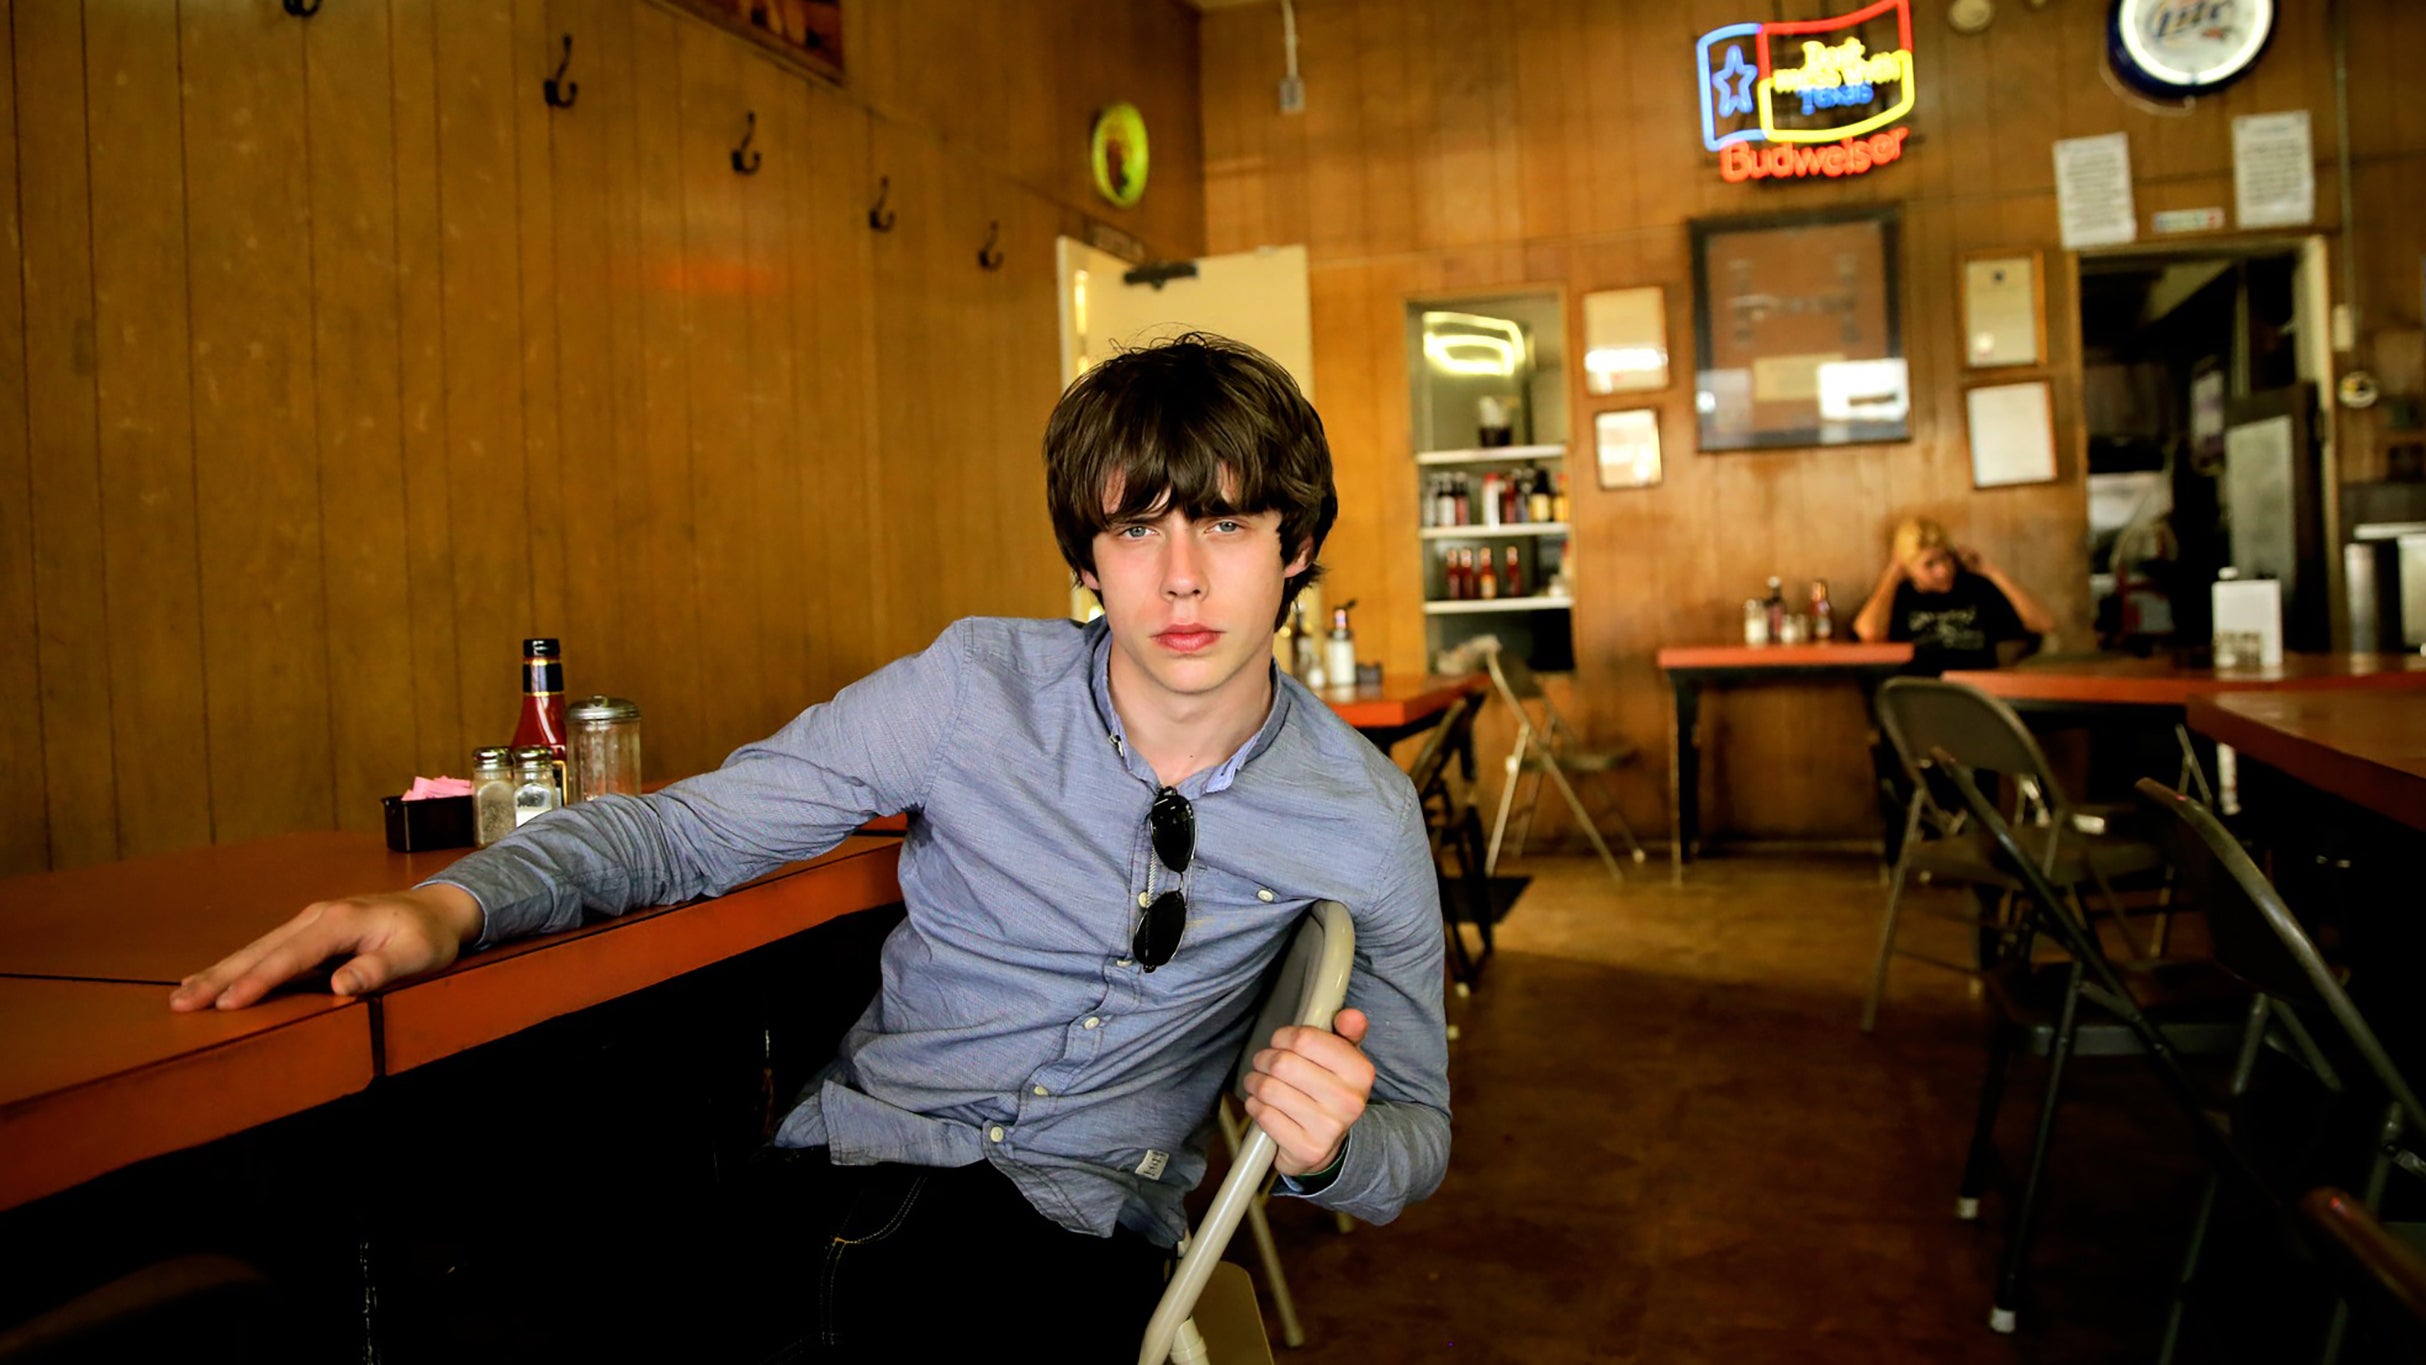 Jake Bugg - Saturday Night, Sunday Morning Tour free pre-sale password for early tickets in Toronto